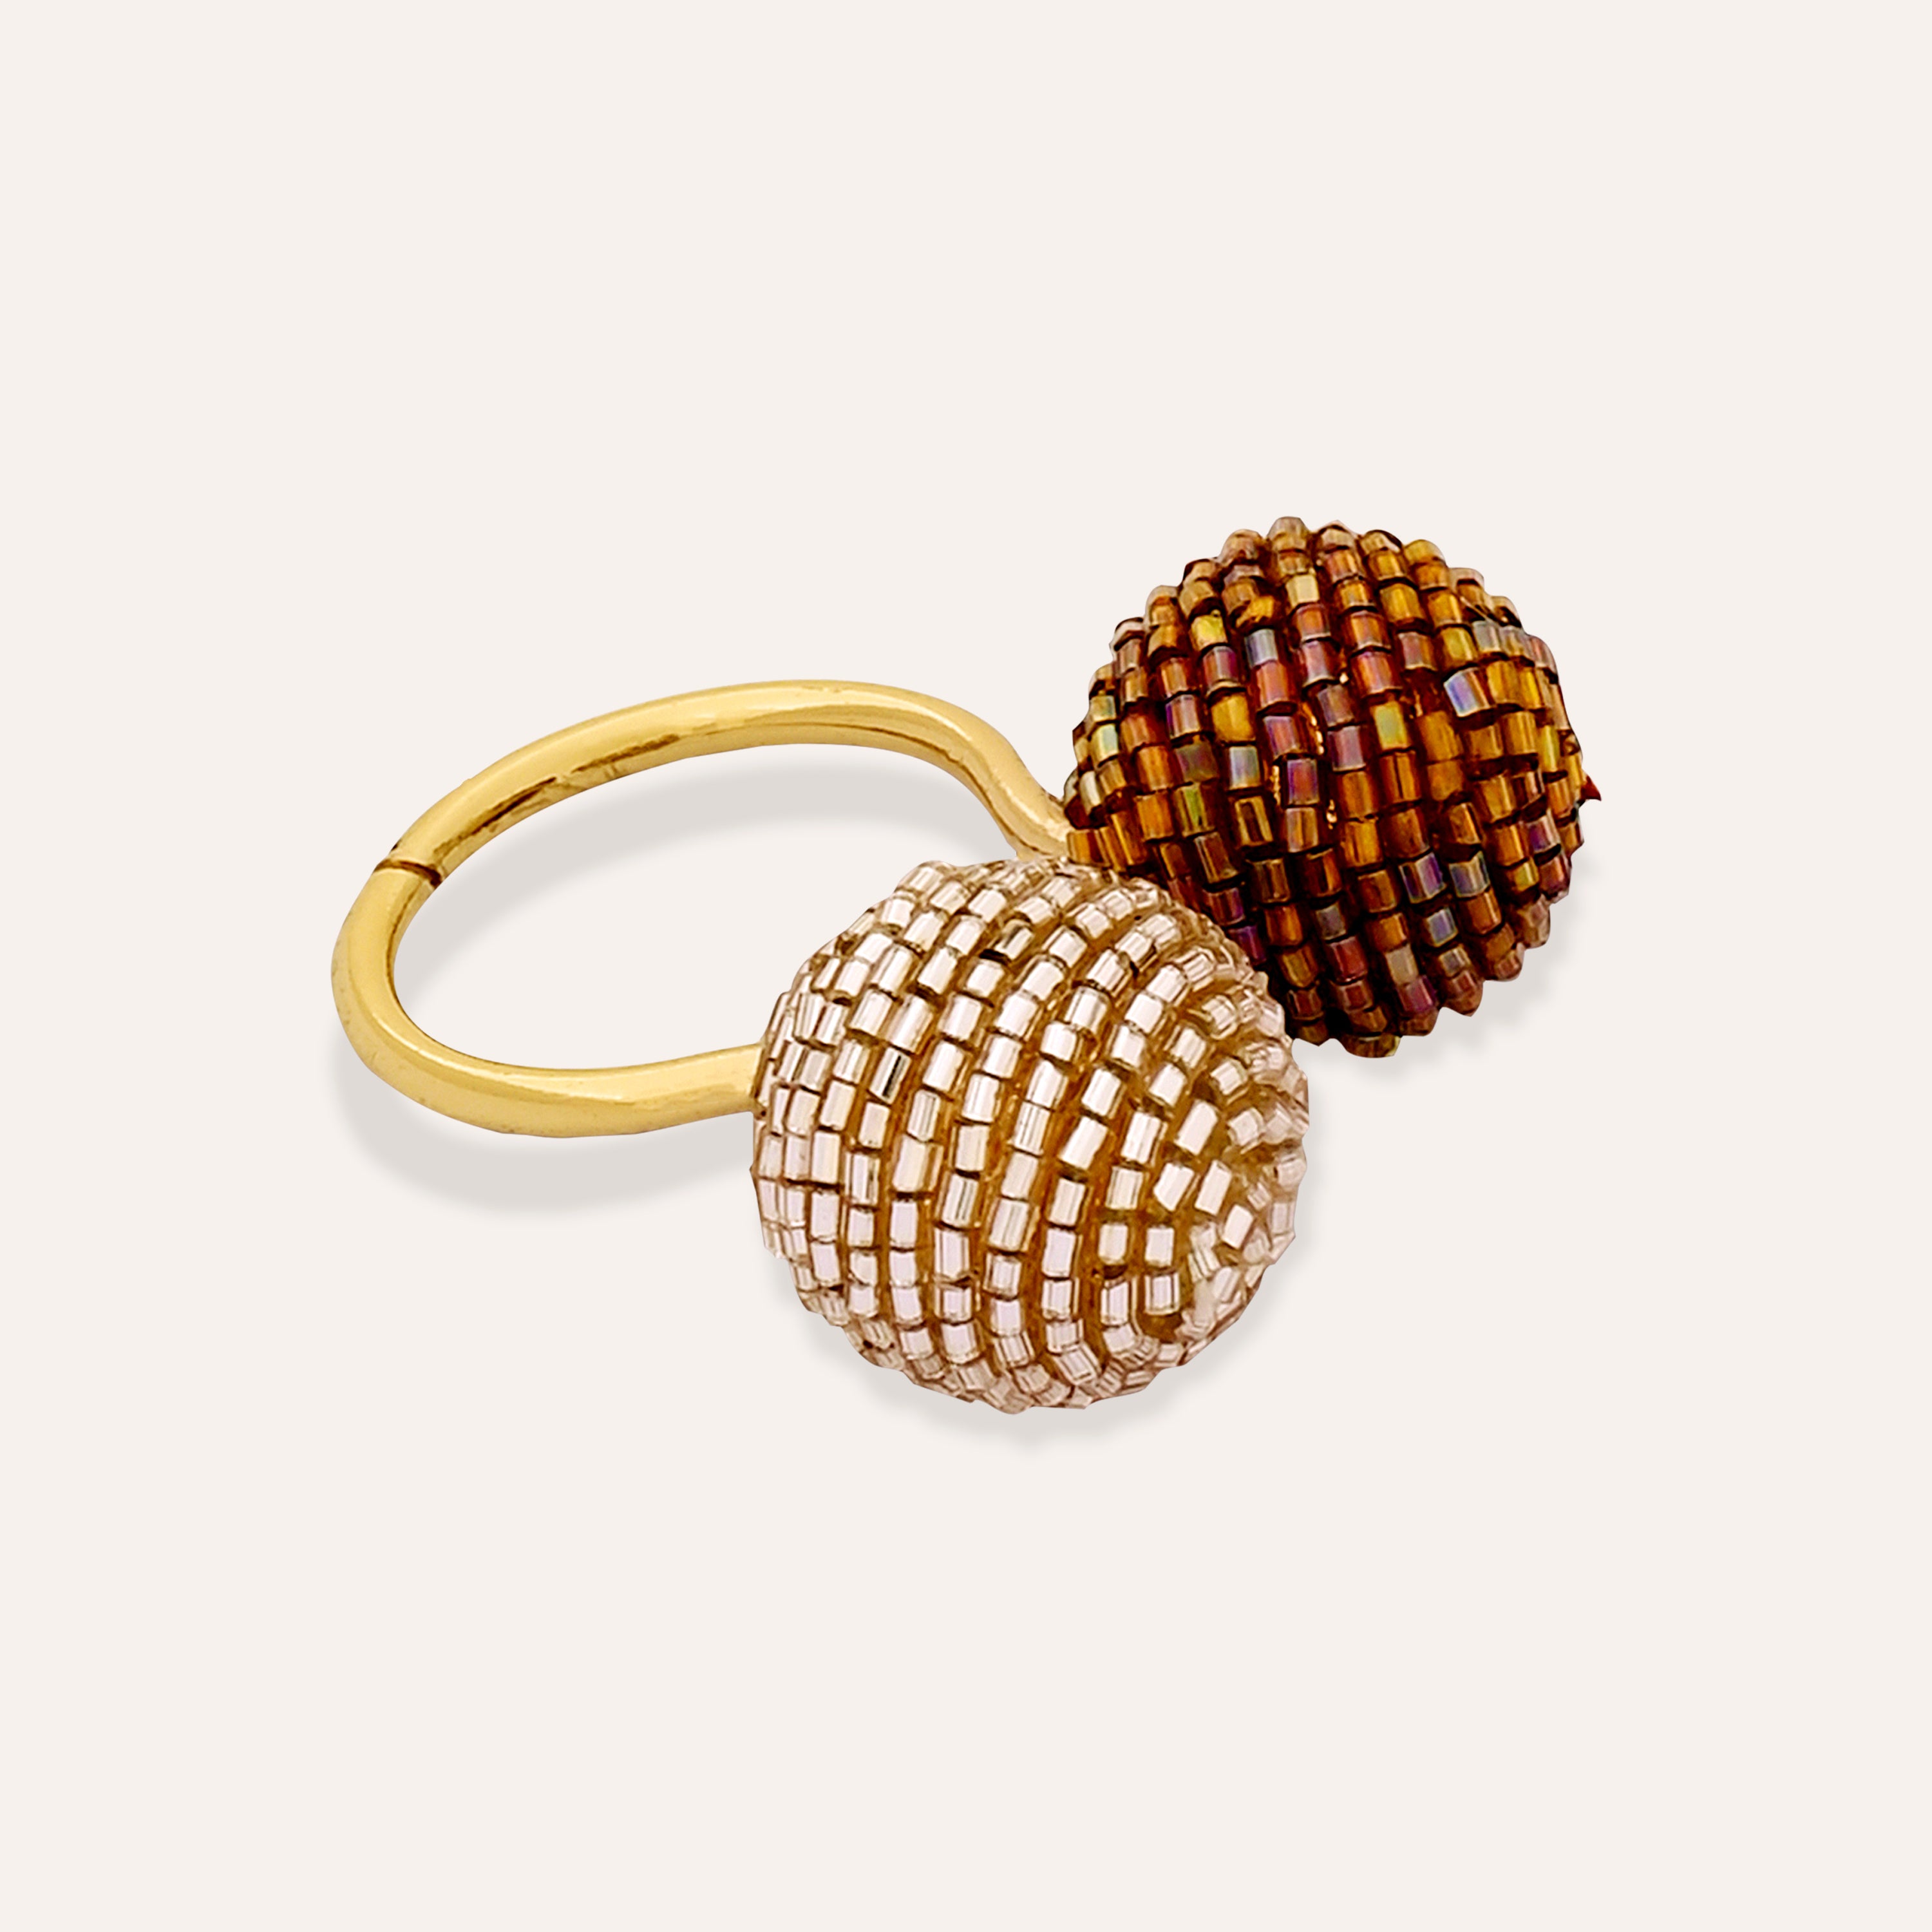 TFC Gold Festive stunner statement ring-Elevate your style with our exquisite collection of gold-plated adjustable rings for women, including timeless signet rings. Explore cheapest fashion jewellery designs with anti-tarnish properties, all at The Fun Company with a touch of elegance